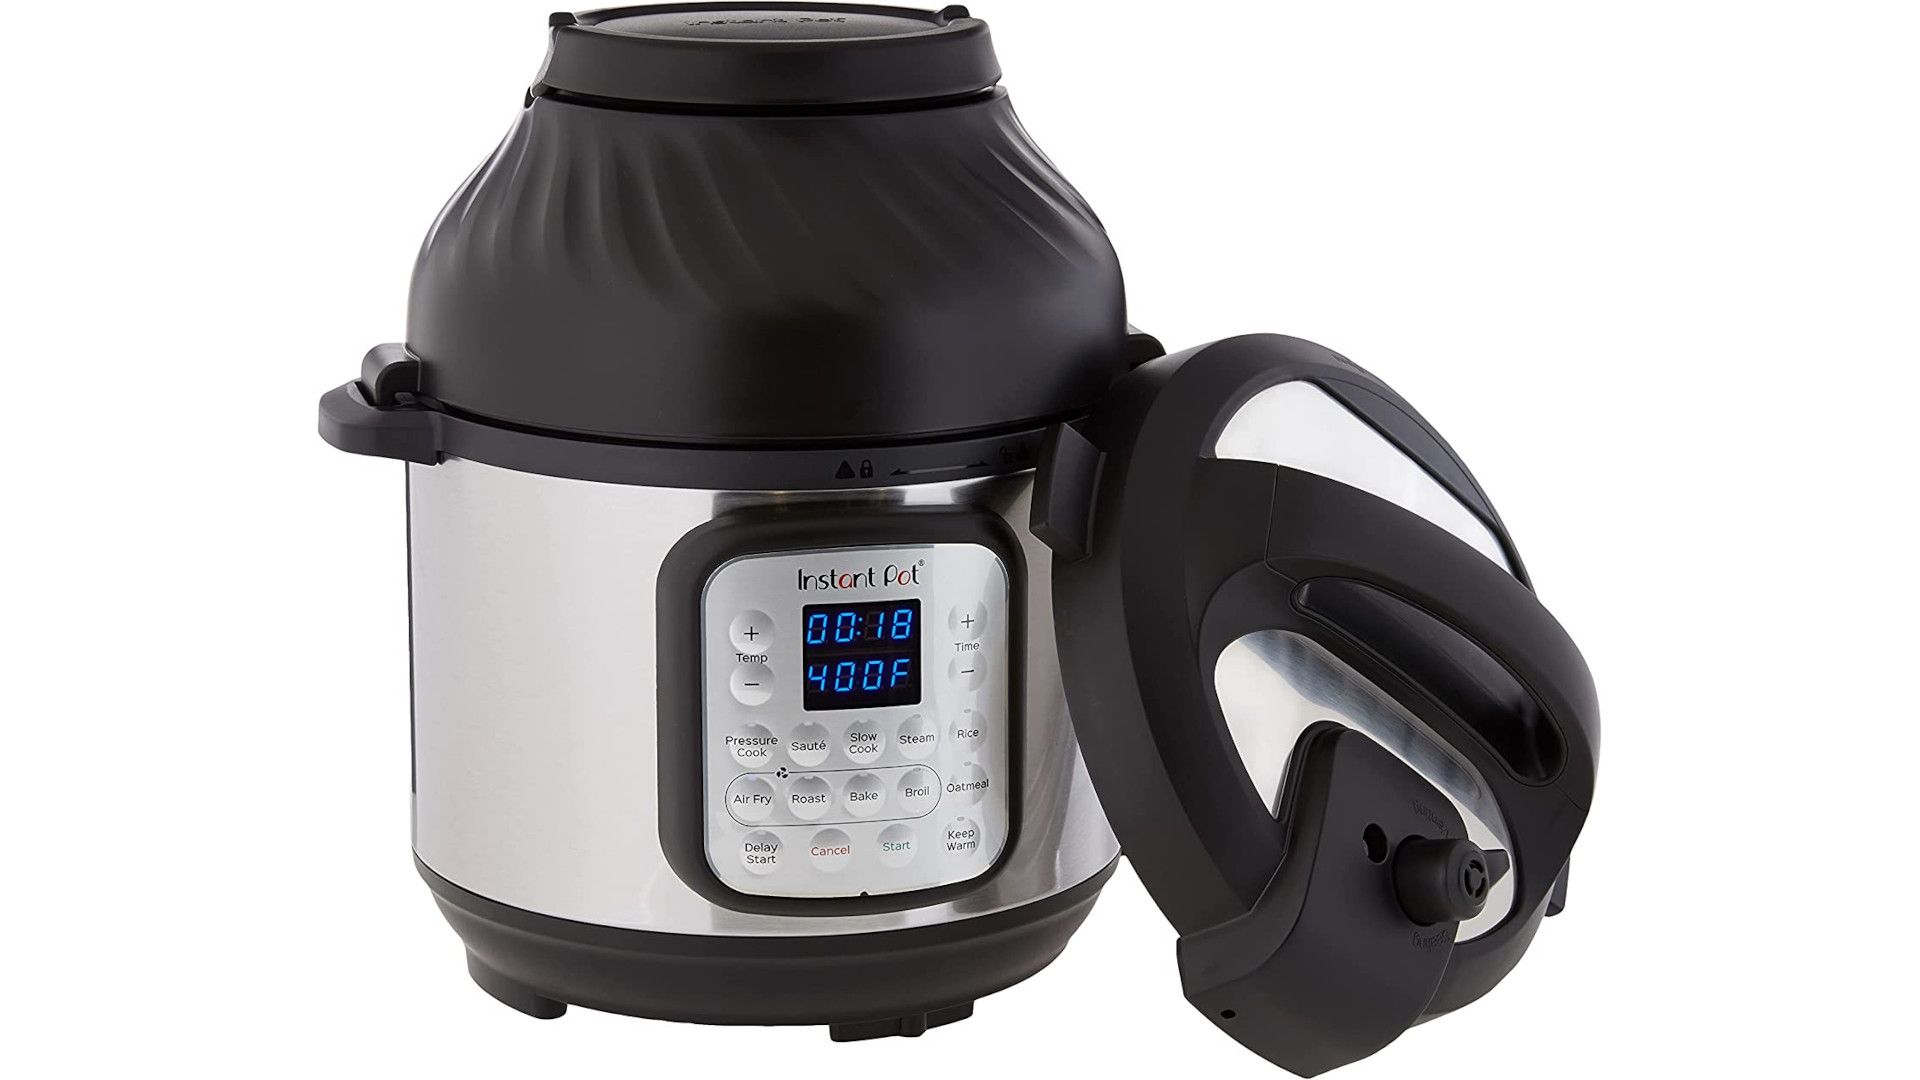 An Instant Pot is shown on a white background.